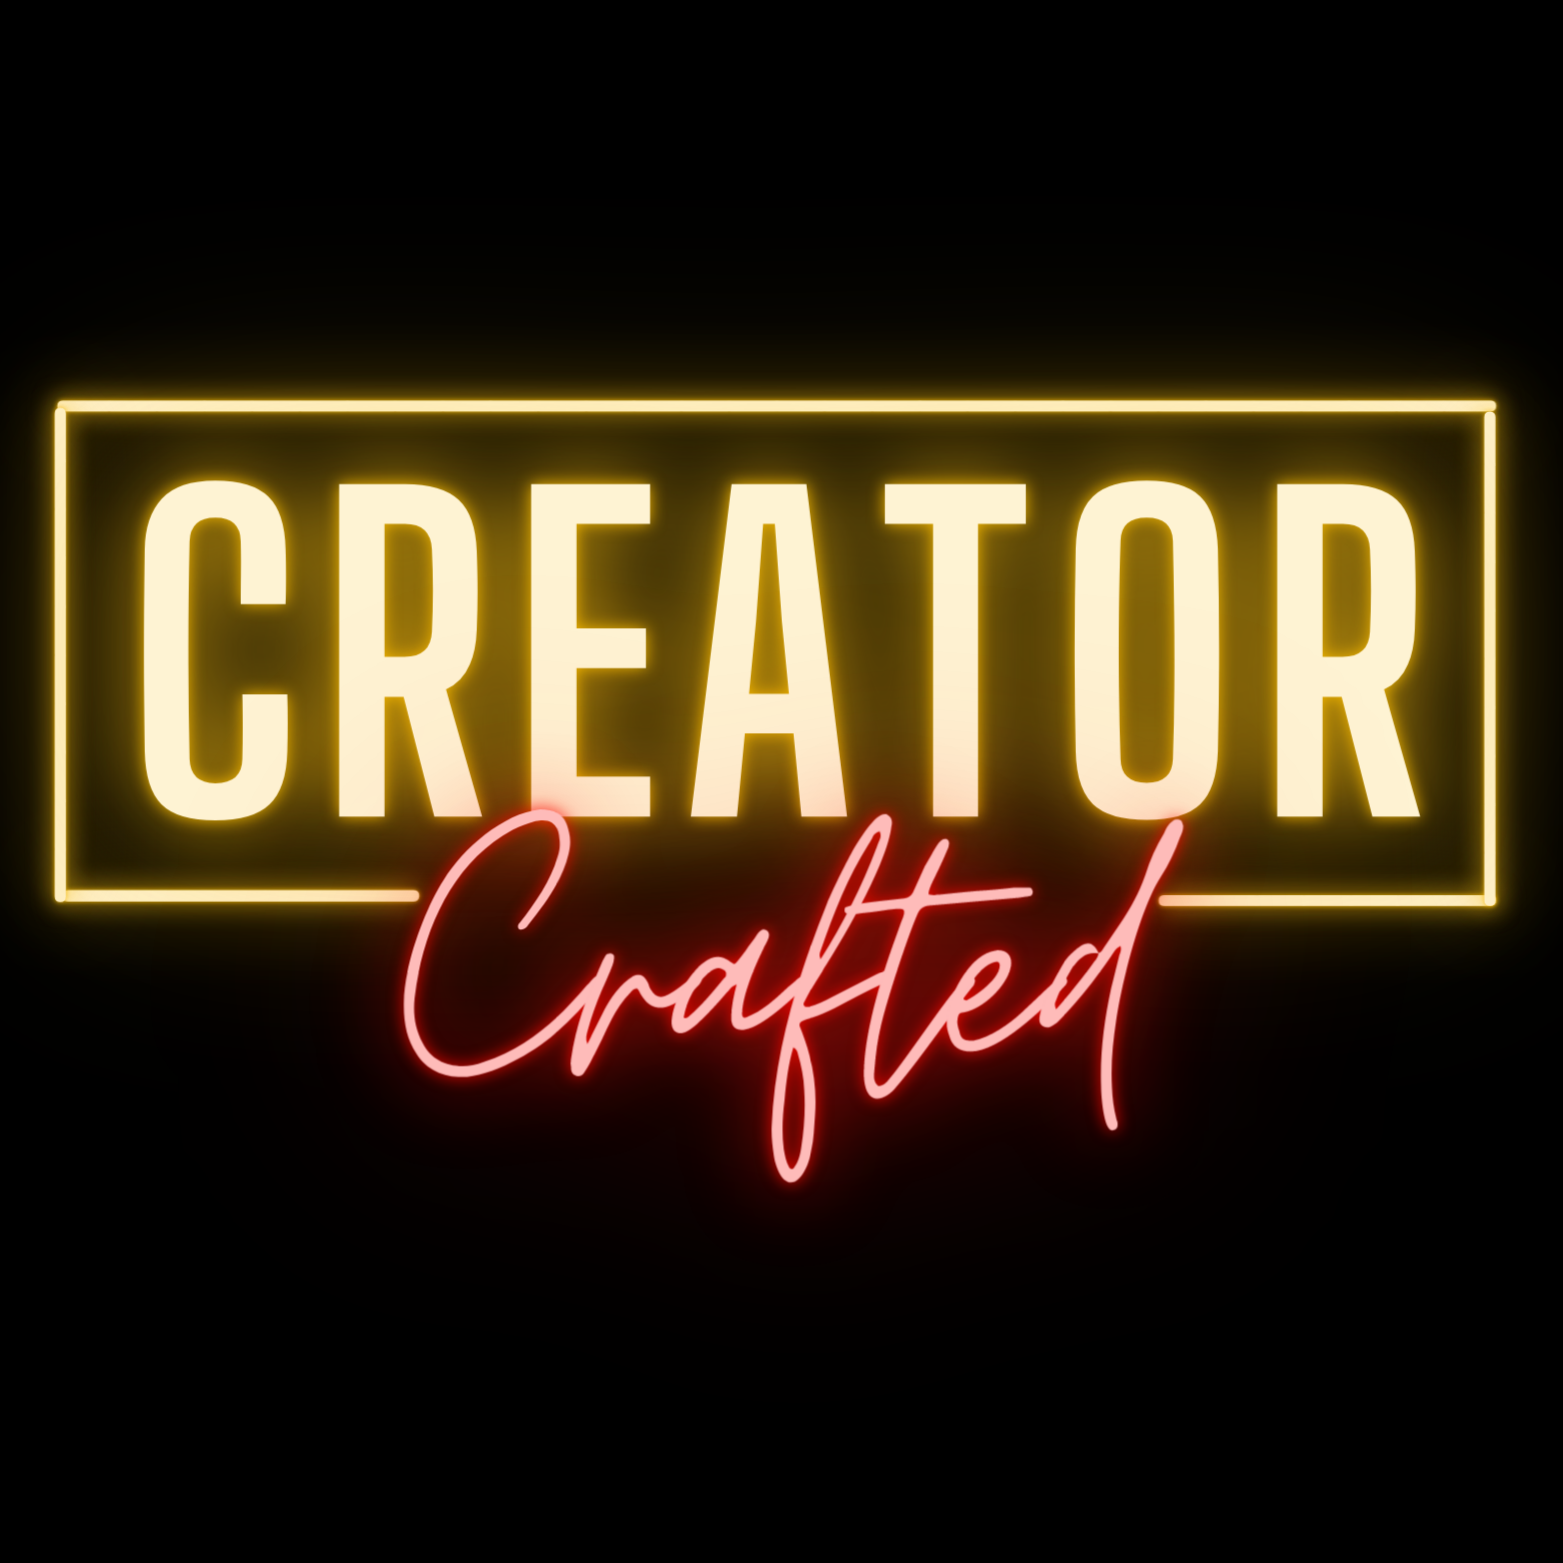 CreatorCrafted | Shop Custom OSRS Neon Signs